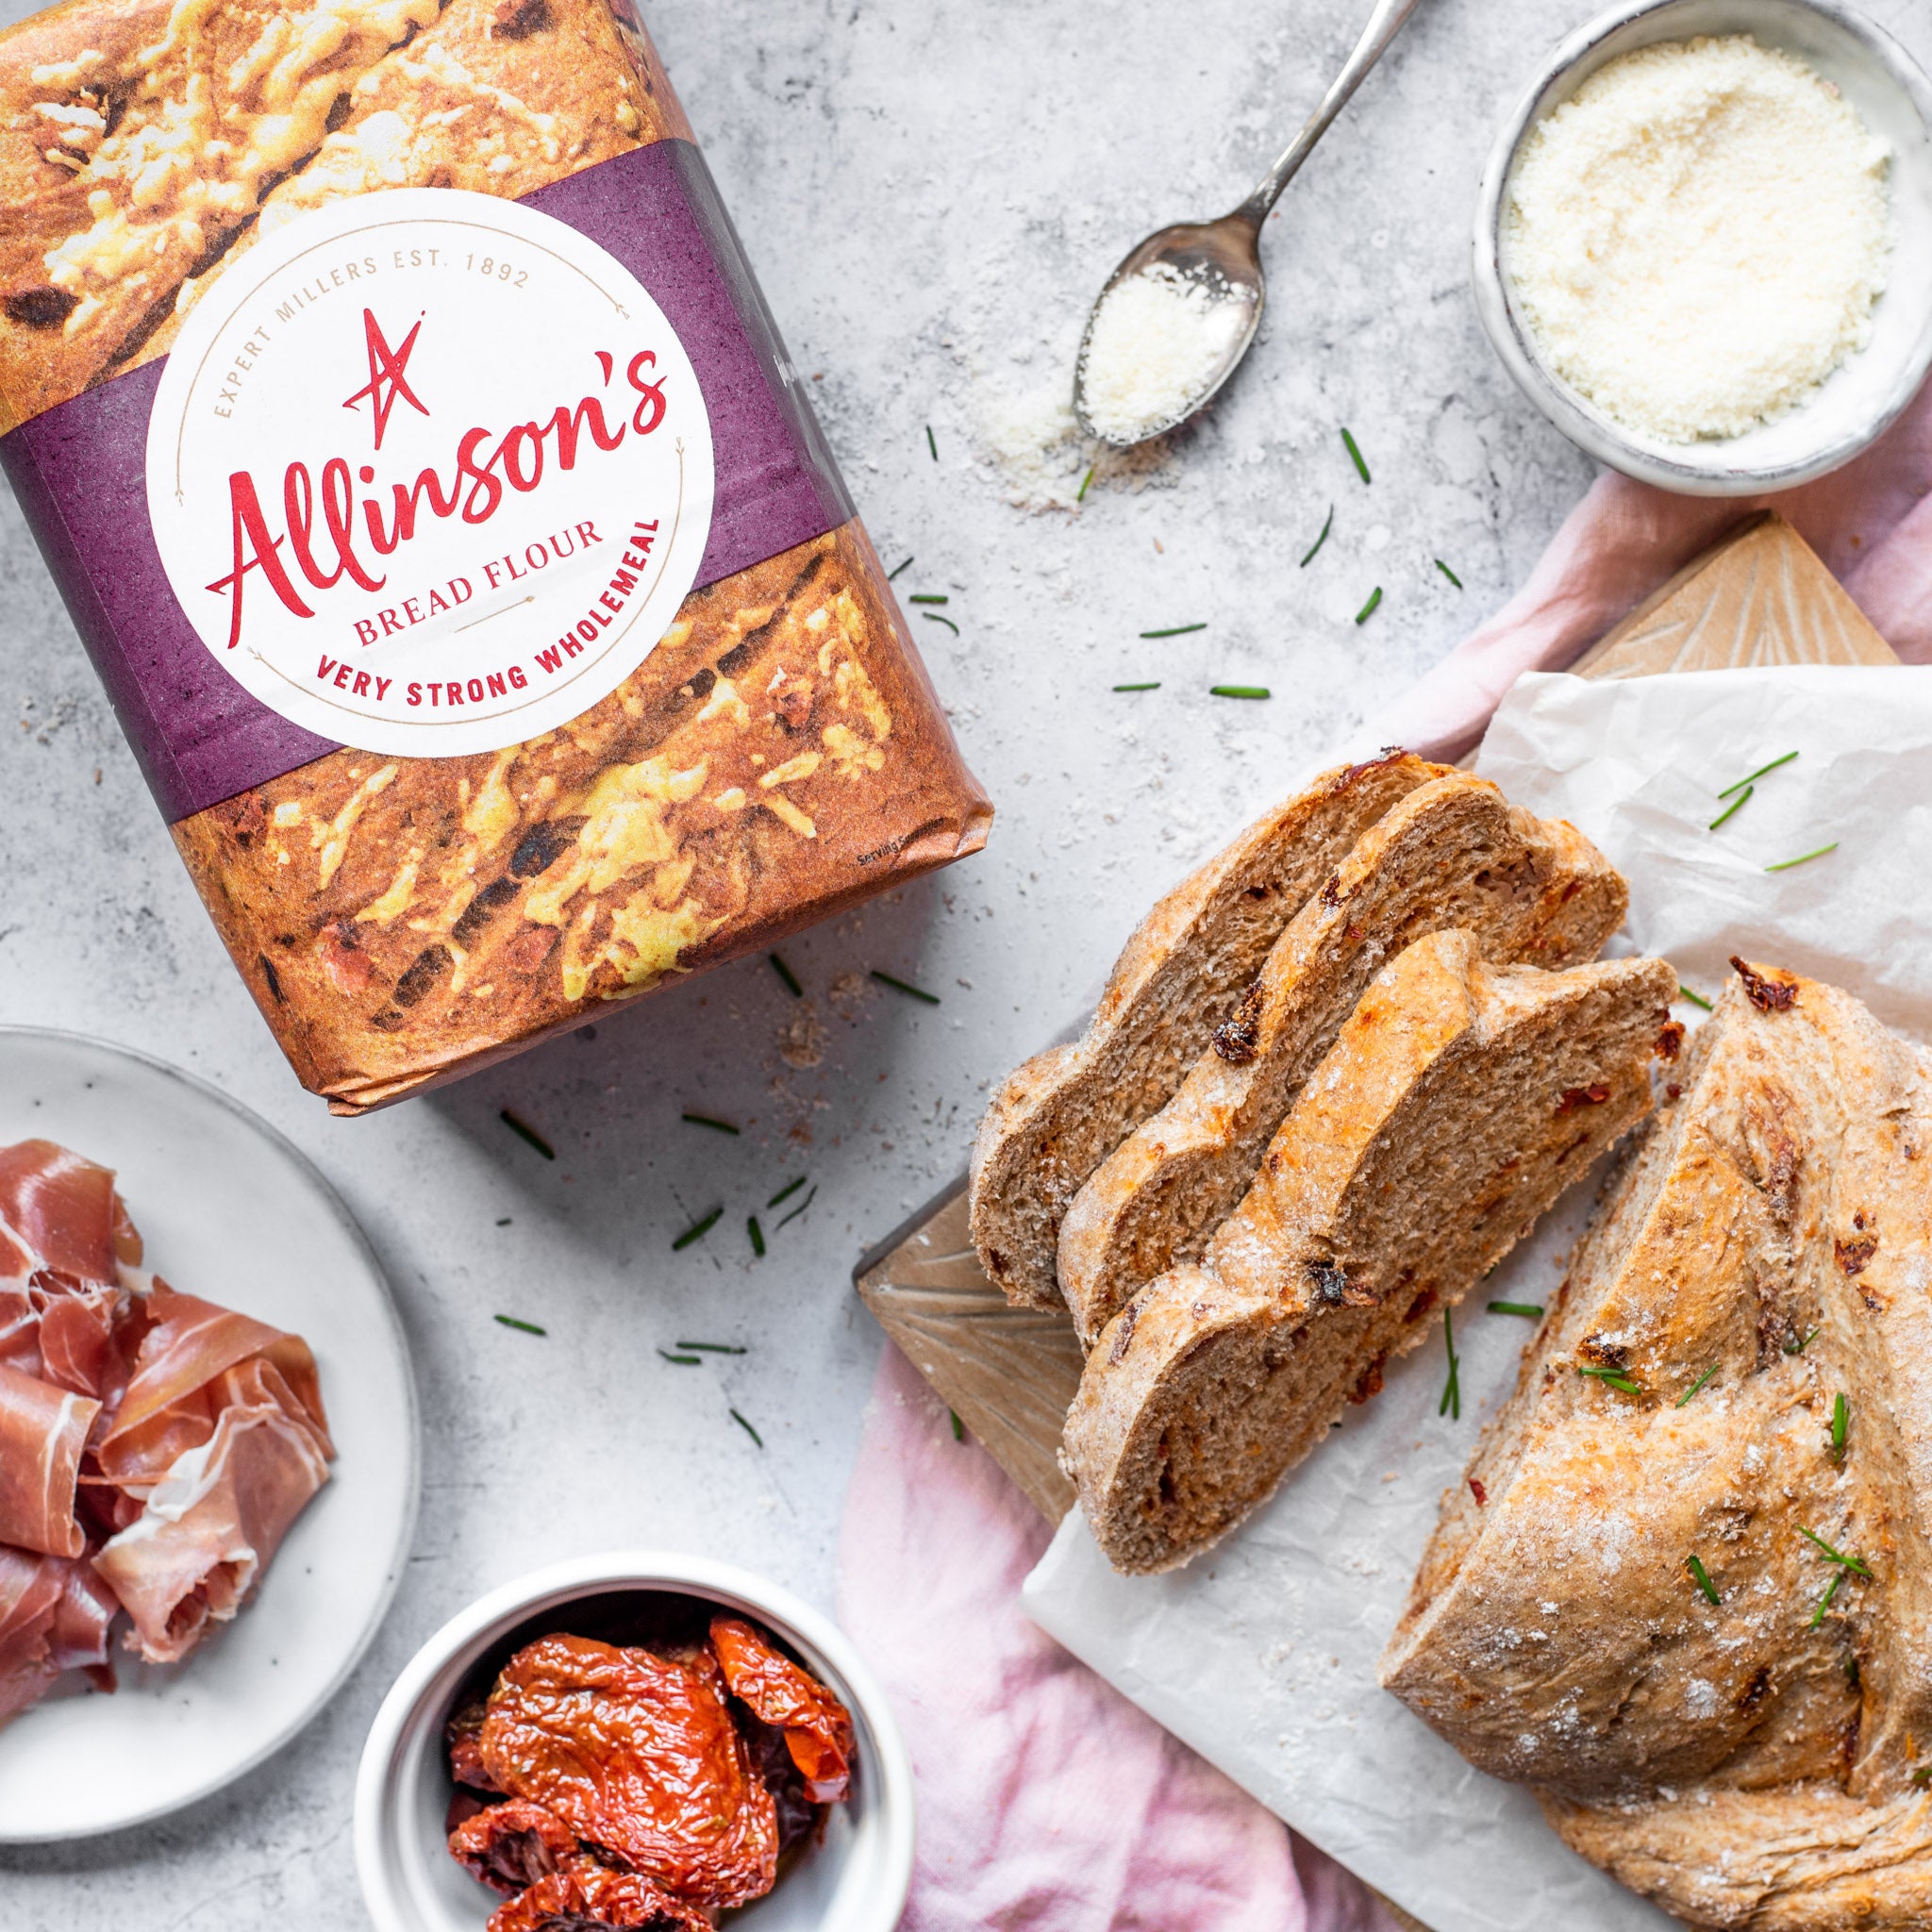 Allinsons-Proscuitto-Sun-Dried-Tomato-Plait-1-1-Baking-Mad-8.jpg